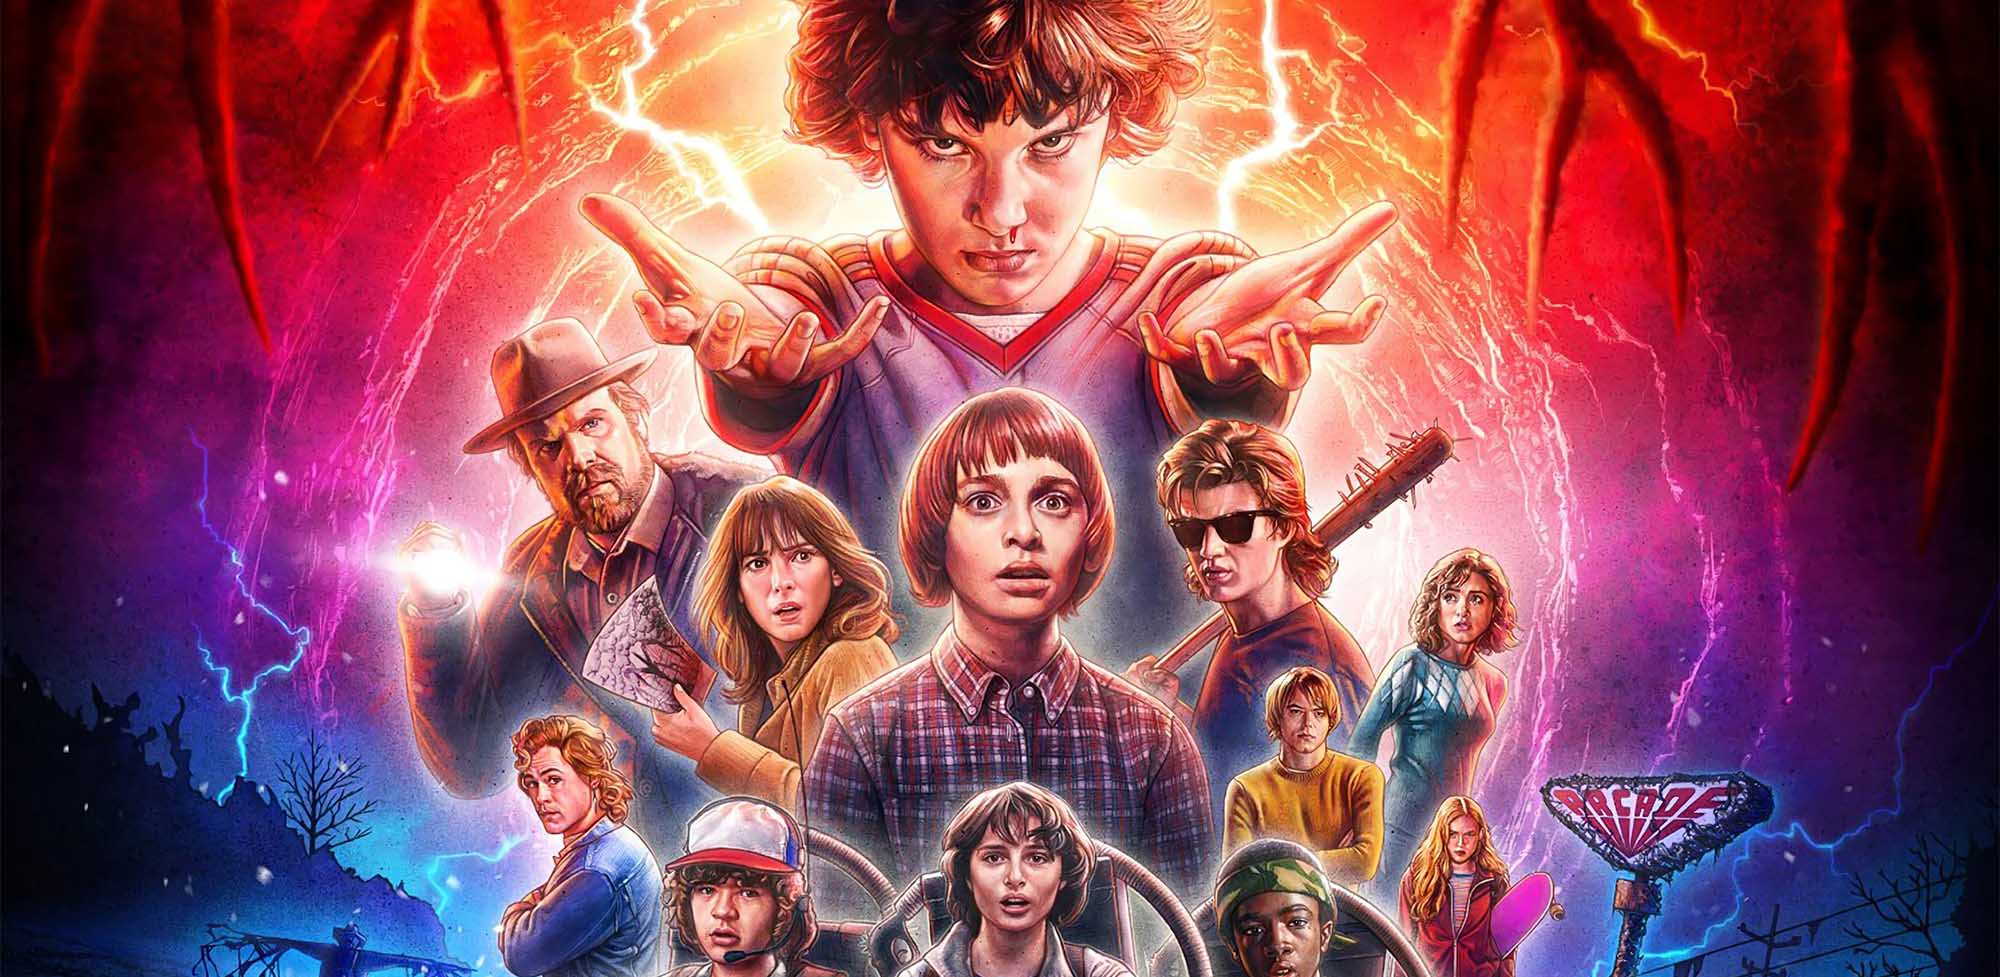 ‘Stranger Things’ has some legal troubles. Did they steal episode ideas? Learn about the lawsuit involving the show’s intellectual property.